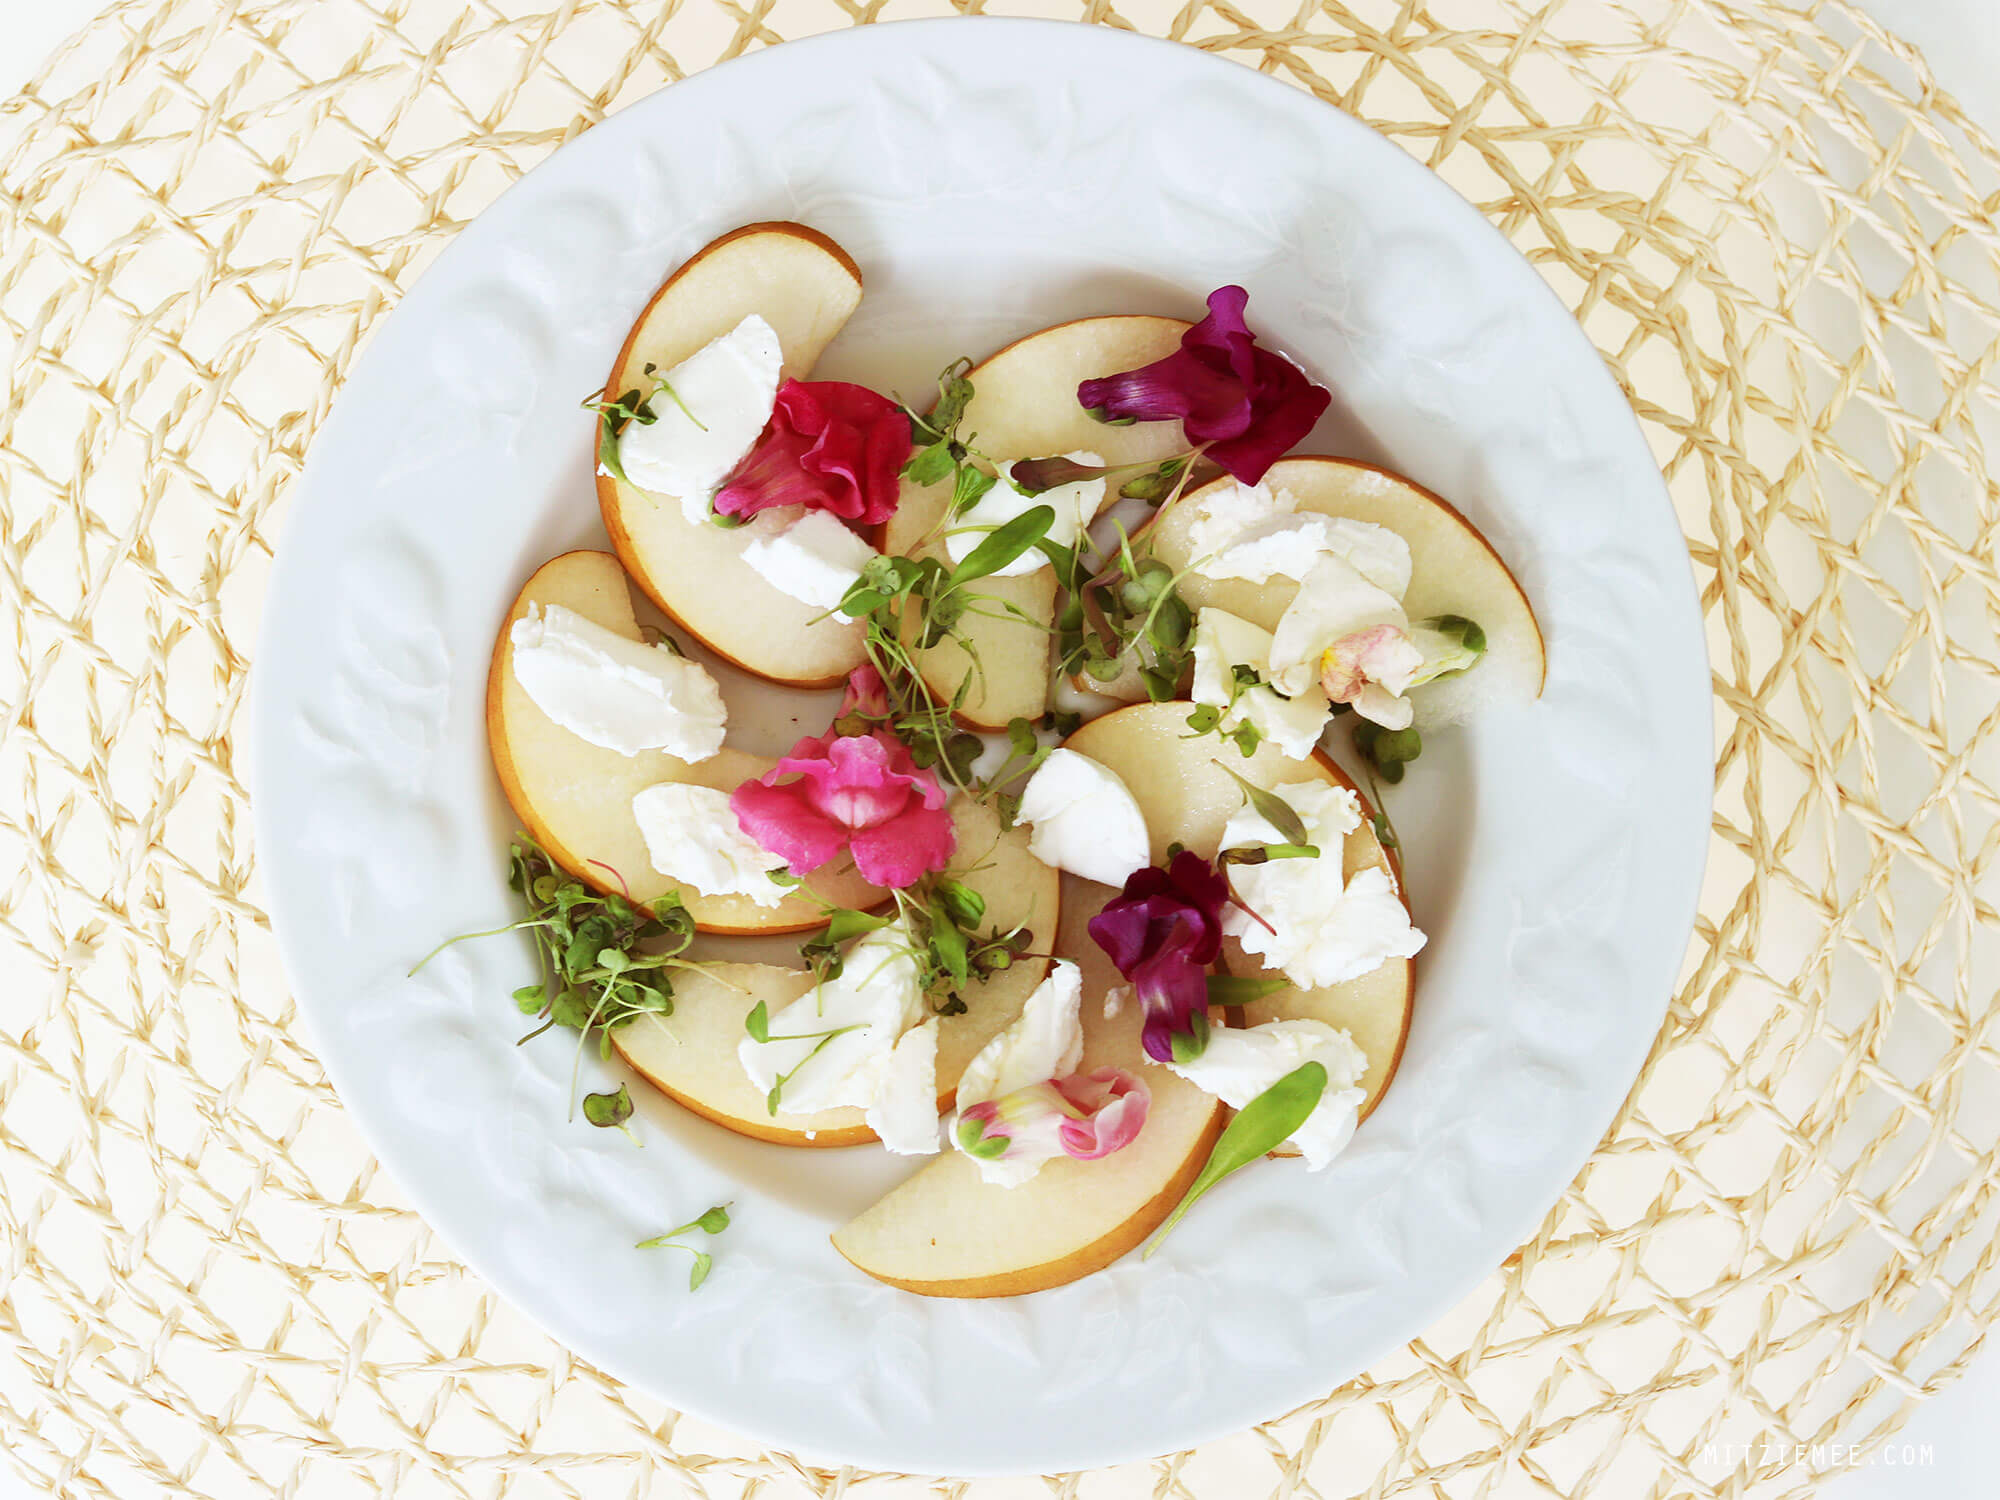 Salad with chevre and Korean pear